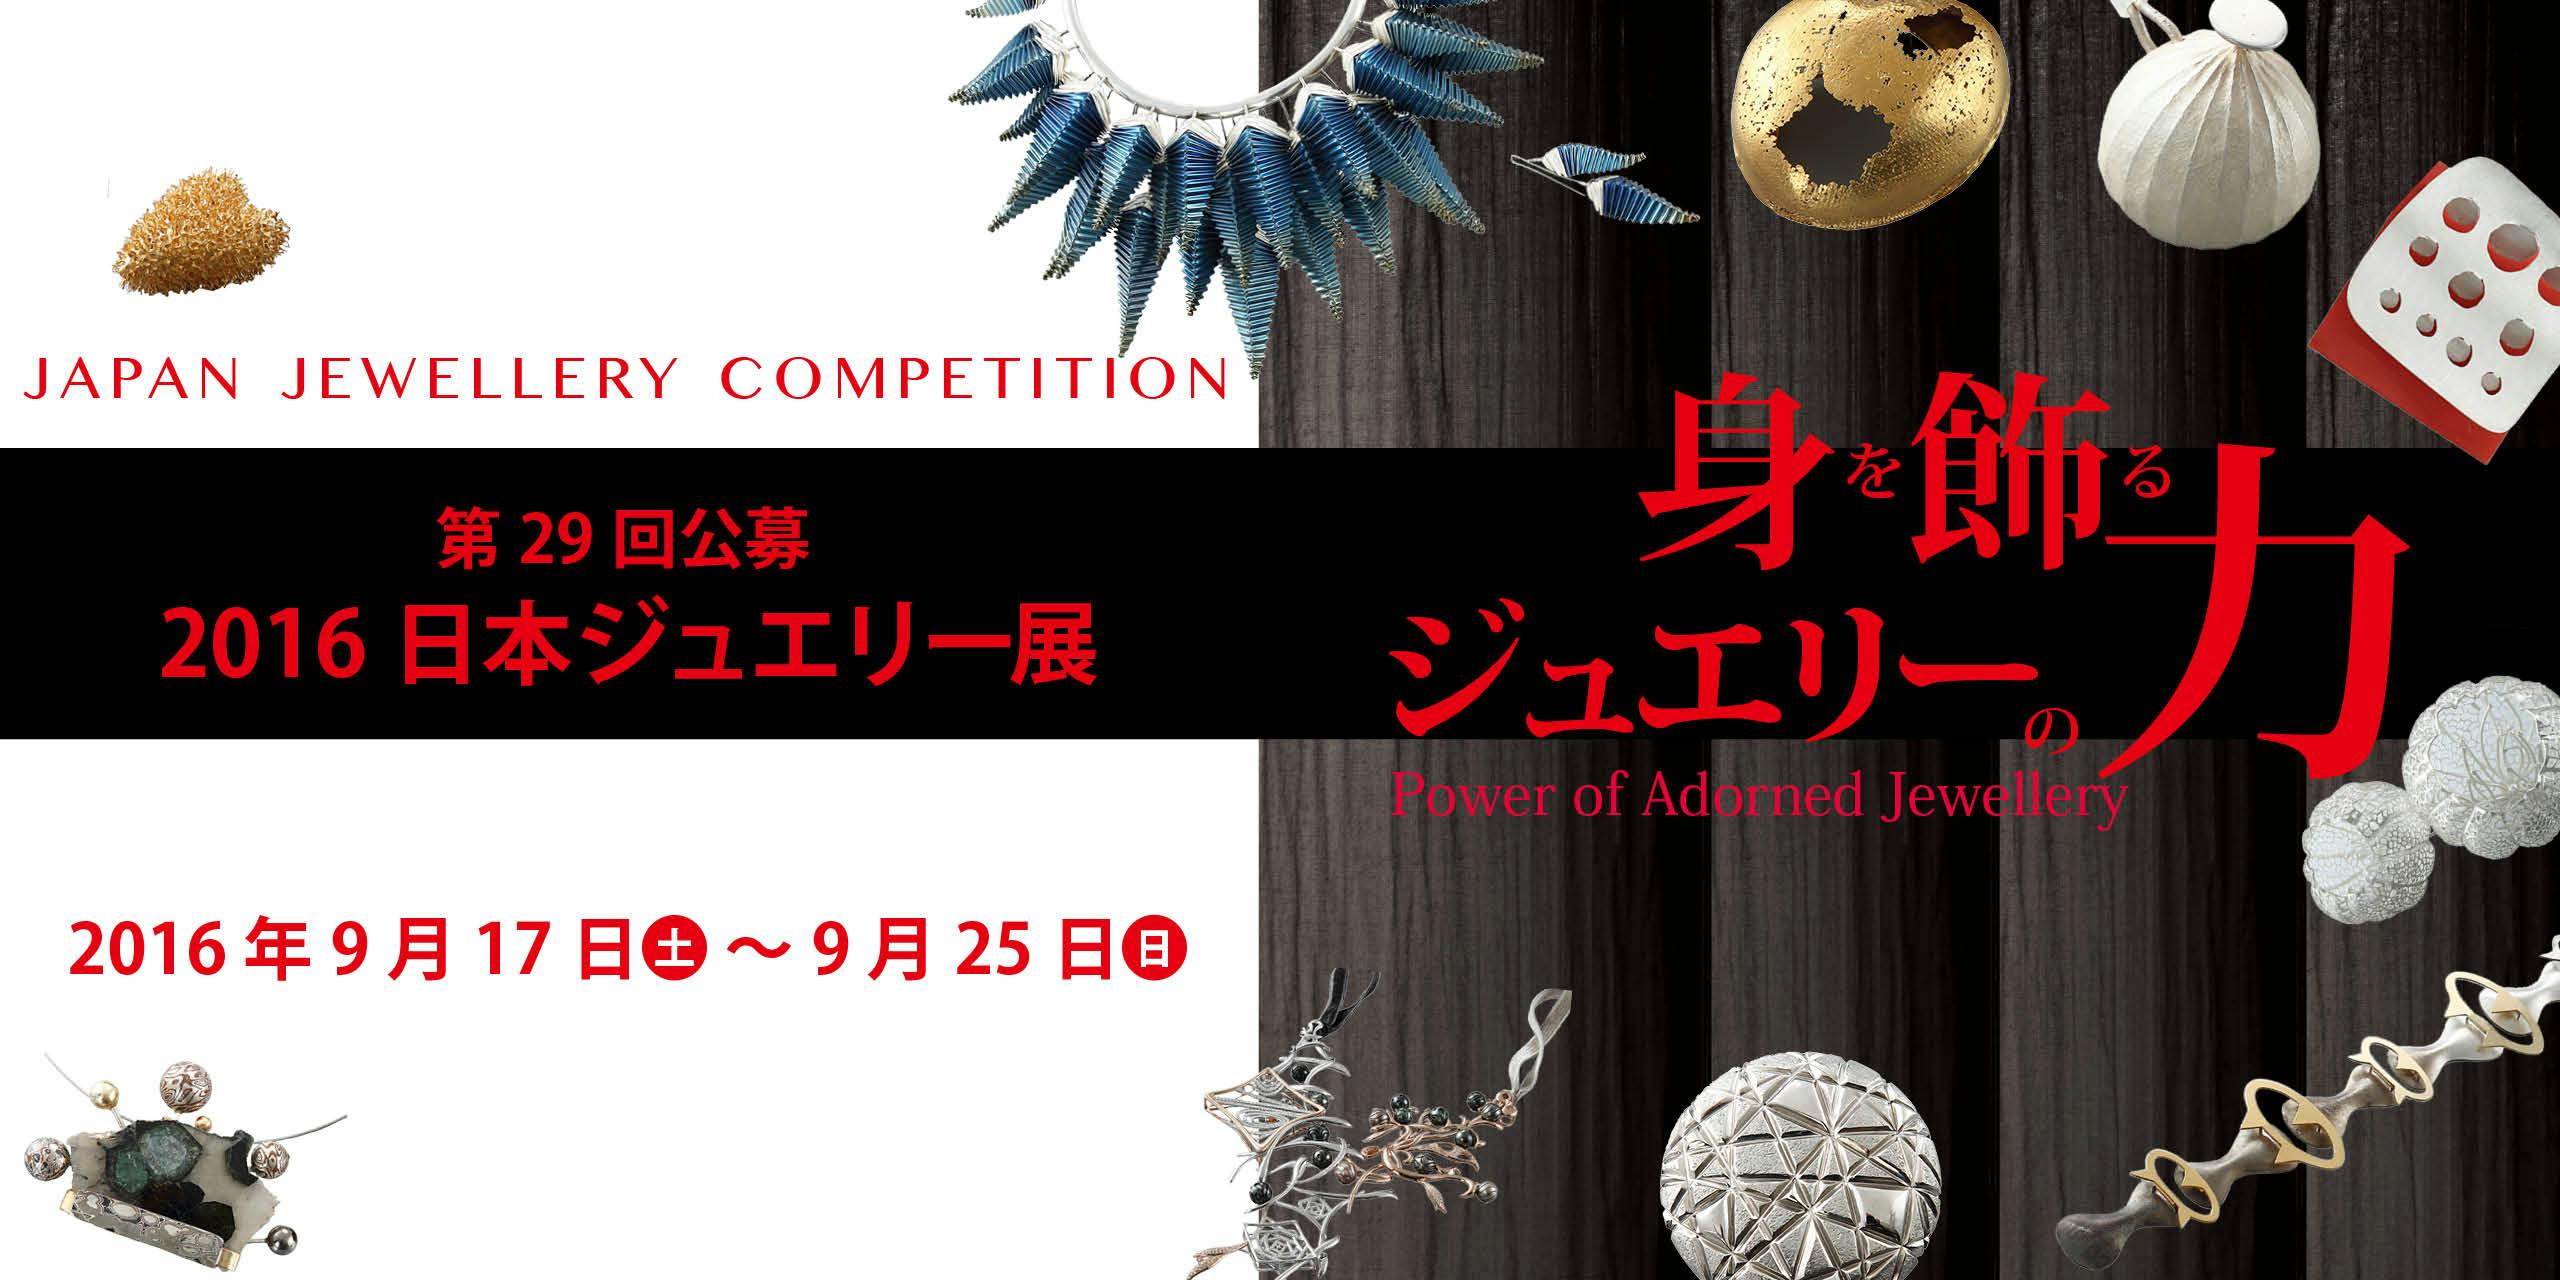 Power of Adorned Jewellery – JAPAN JEWELLERY COMPETITION